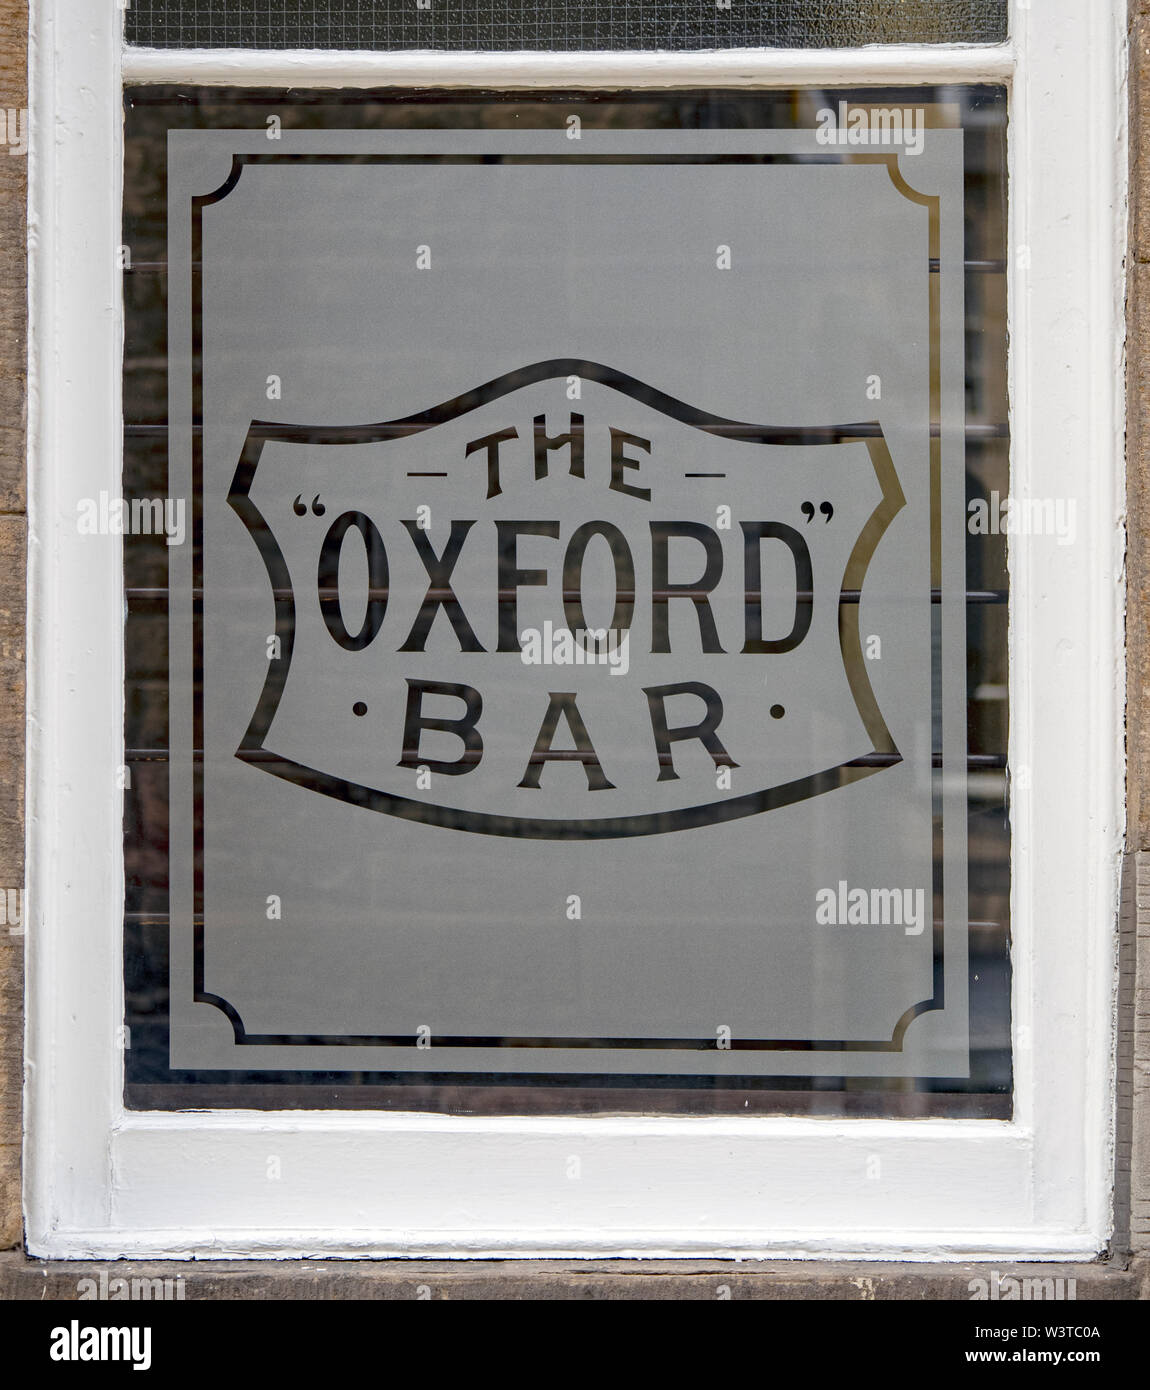 A window in the Oxford Bar, Edinburgh, the favourite pub of Inspector Rebus, the fictional character created by author Ian Rankin. Stock Photo